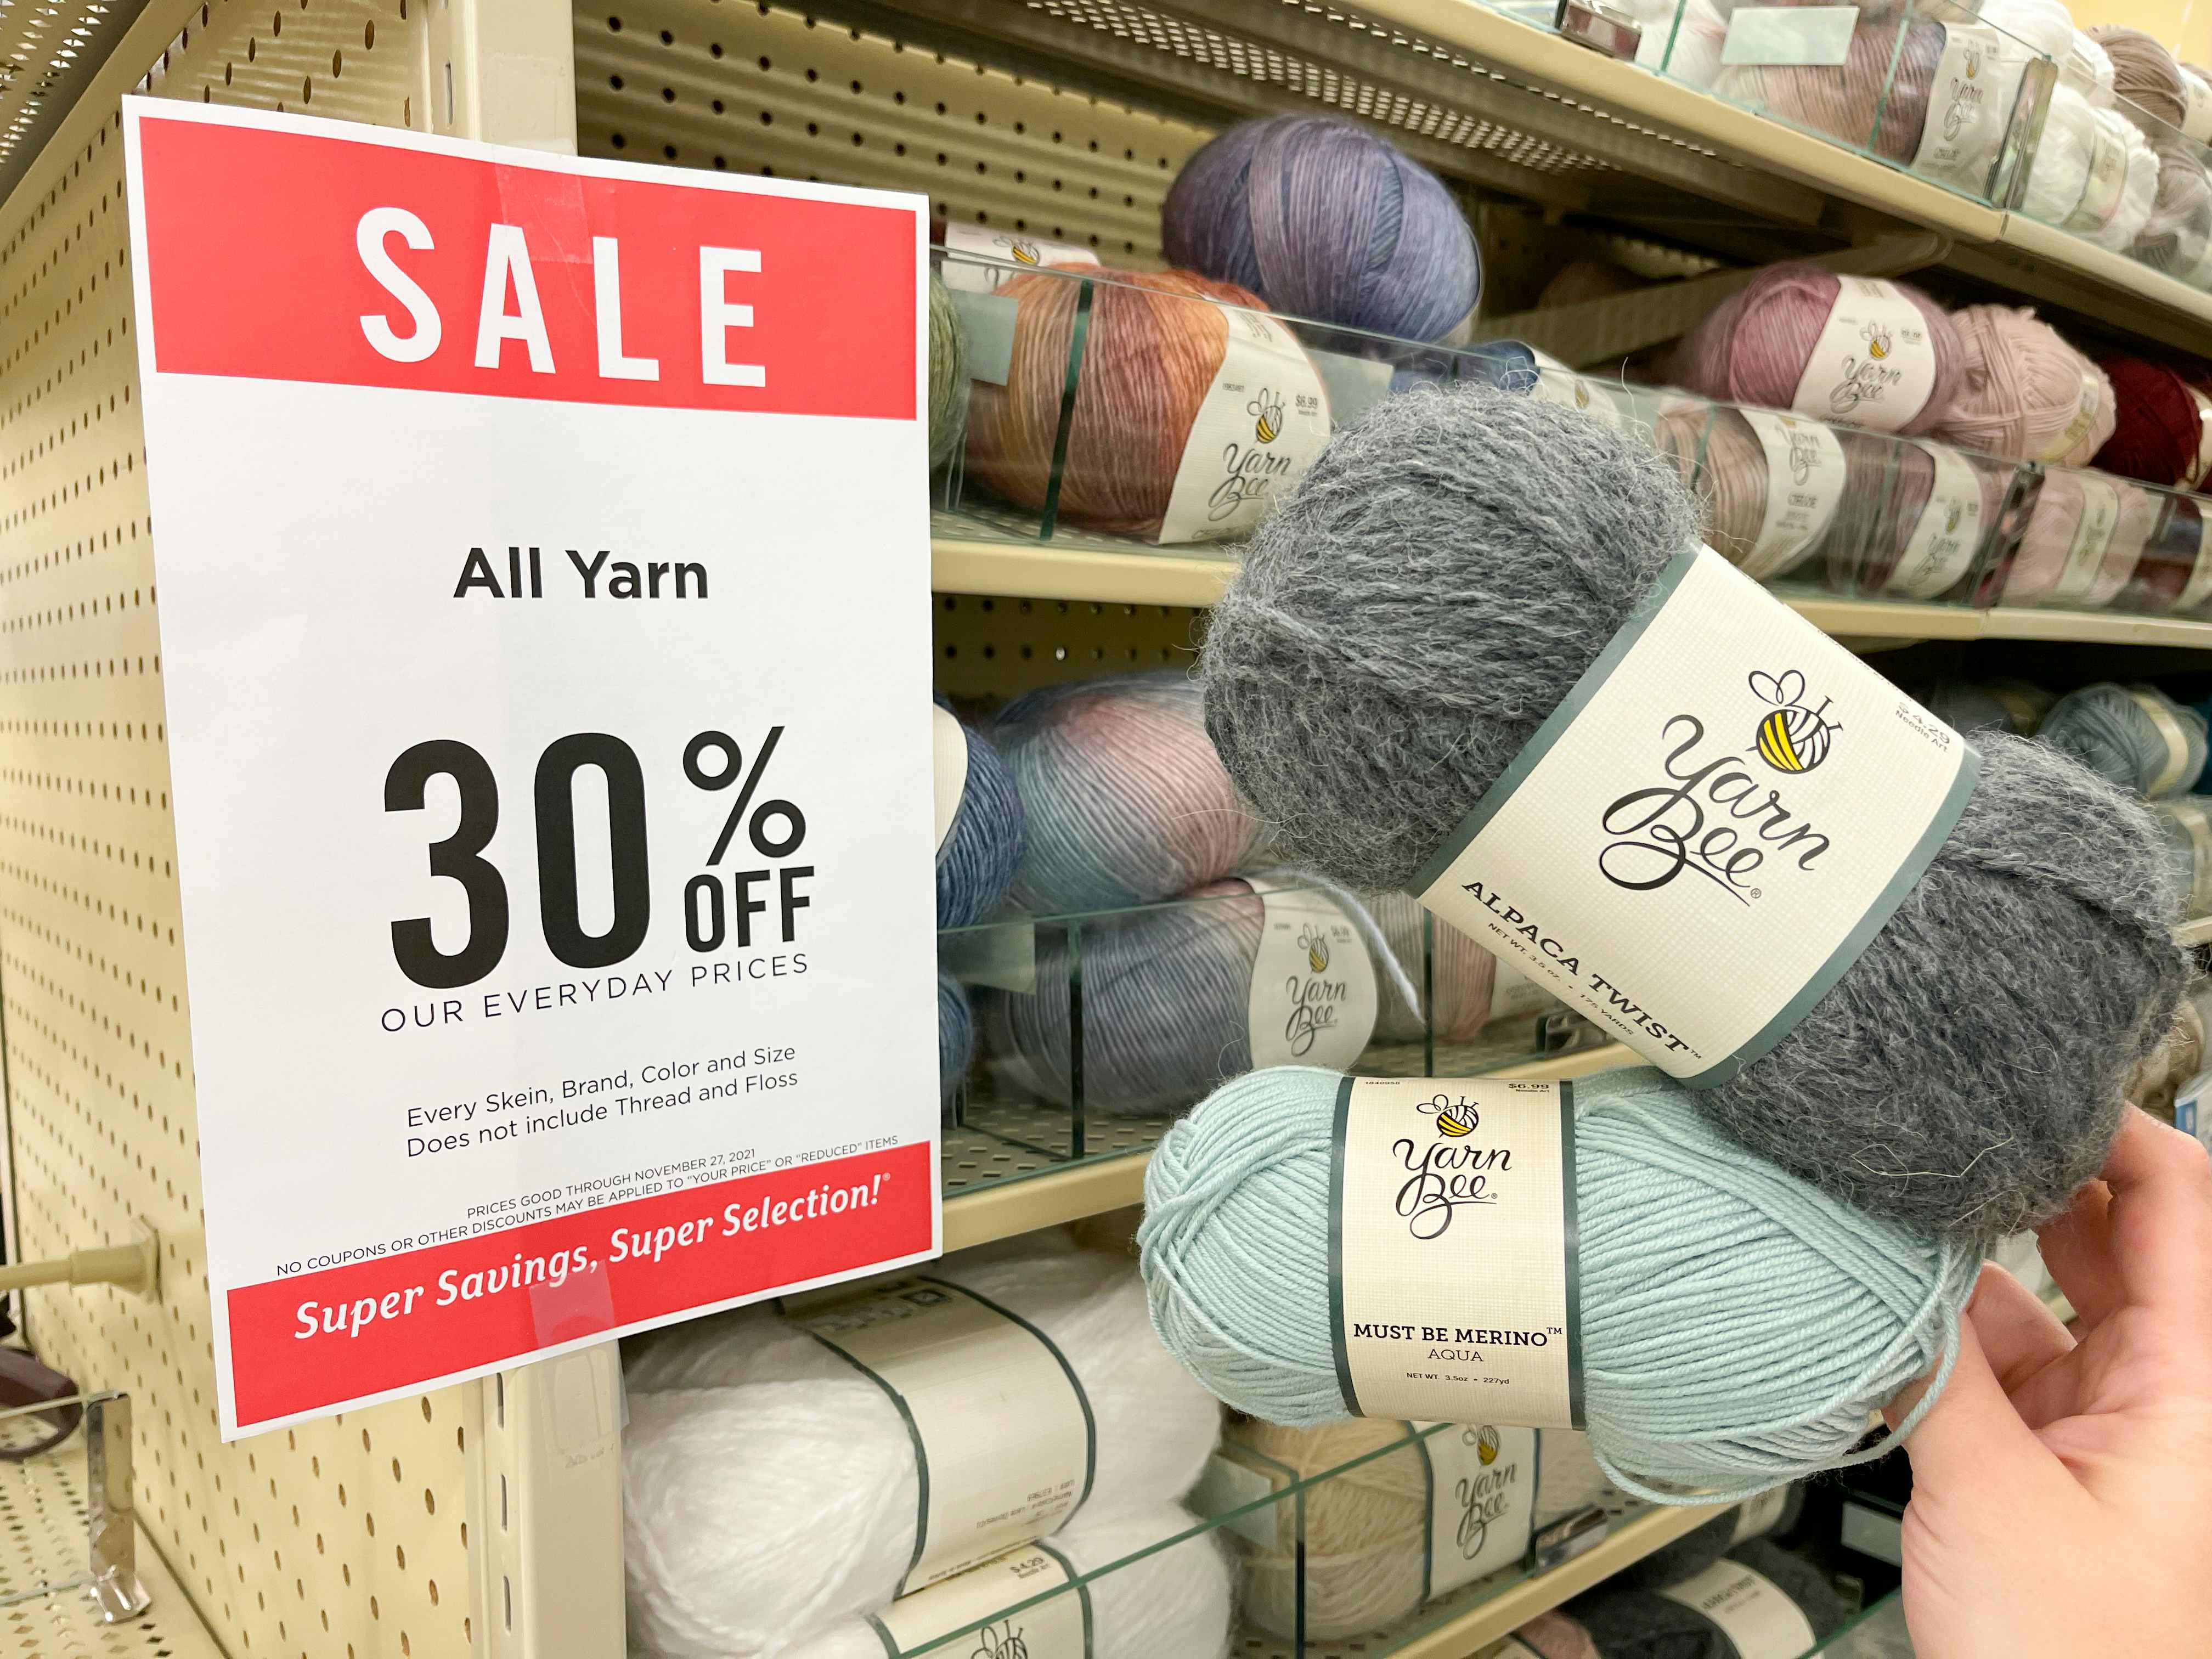 LARGE HOBBY LOBBY 75% OFF YARN CLEARANCE A MUST SEE MARCH 2023/PT. 1 